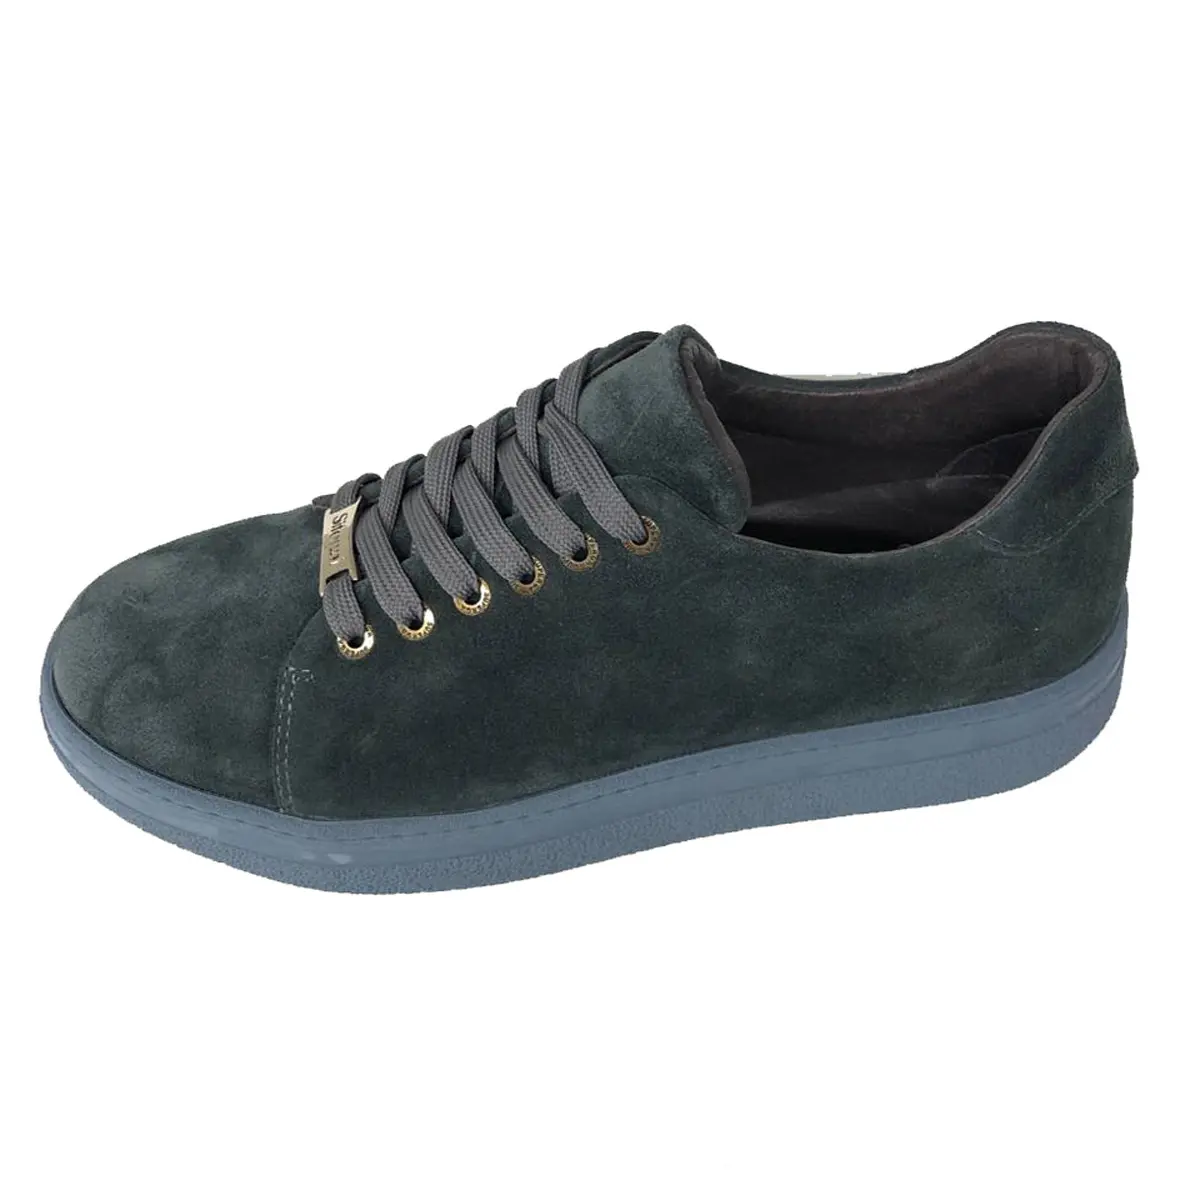 Men's suede sneakers casual footwear made in Uzbekistan various kinds of shoes for sale